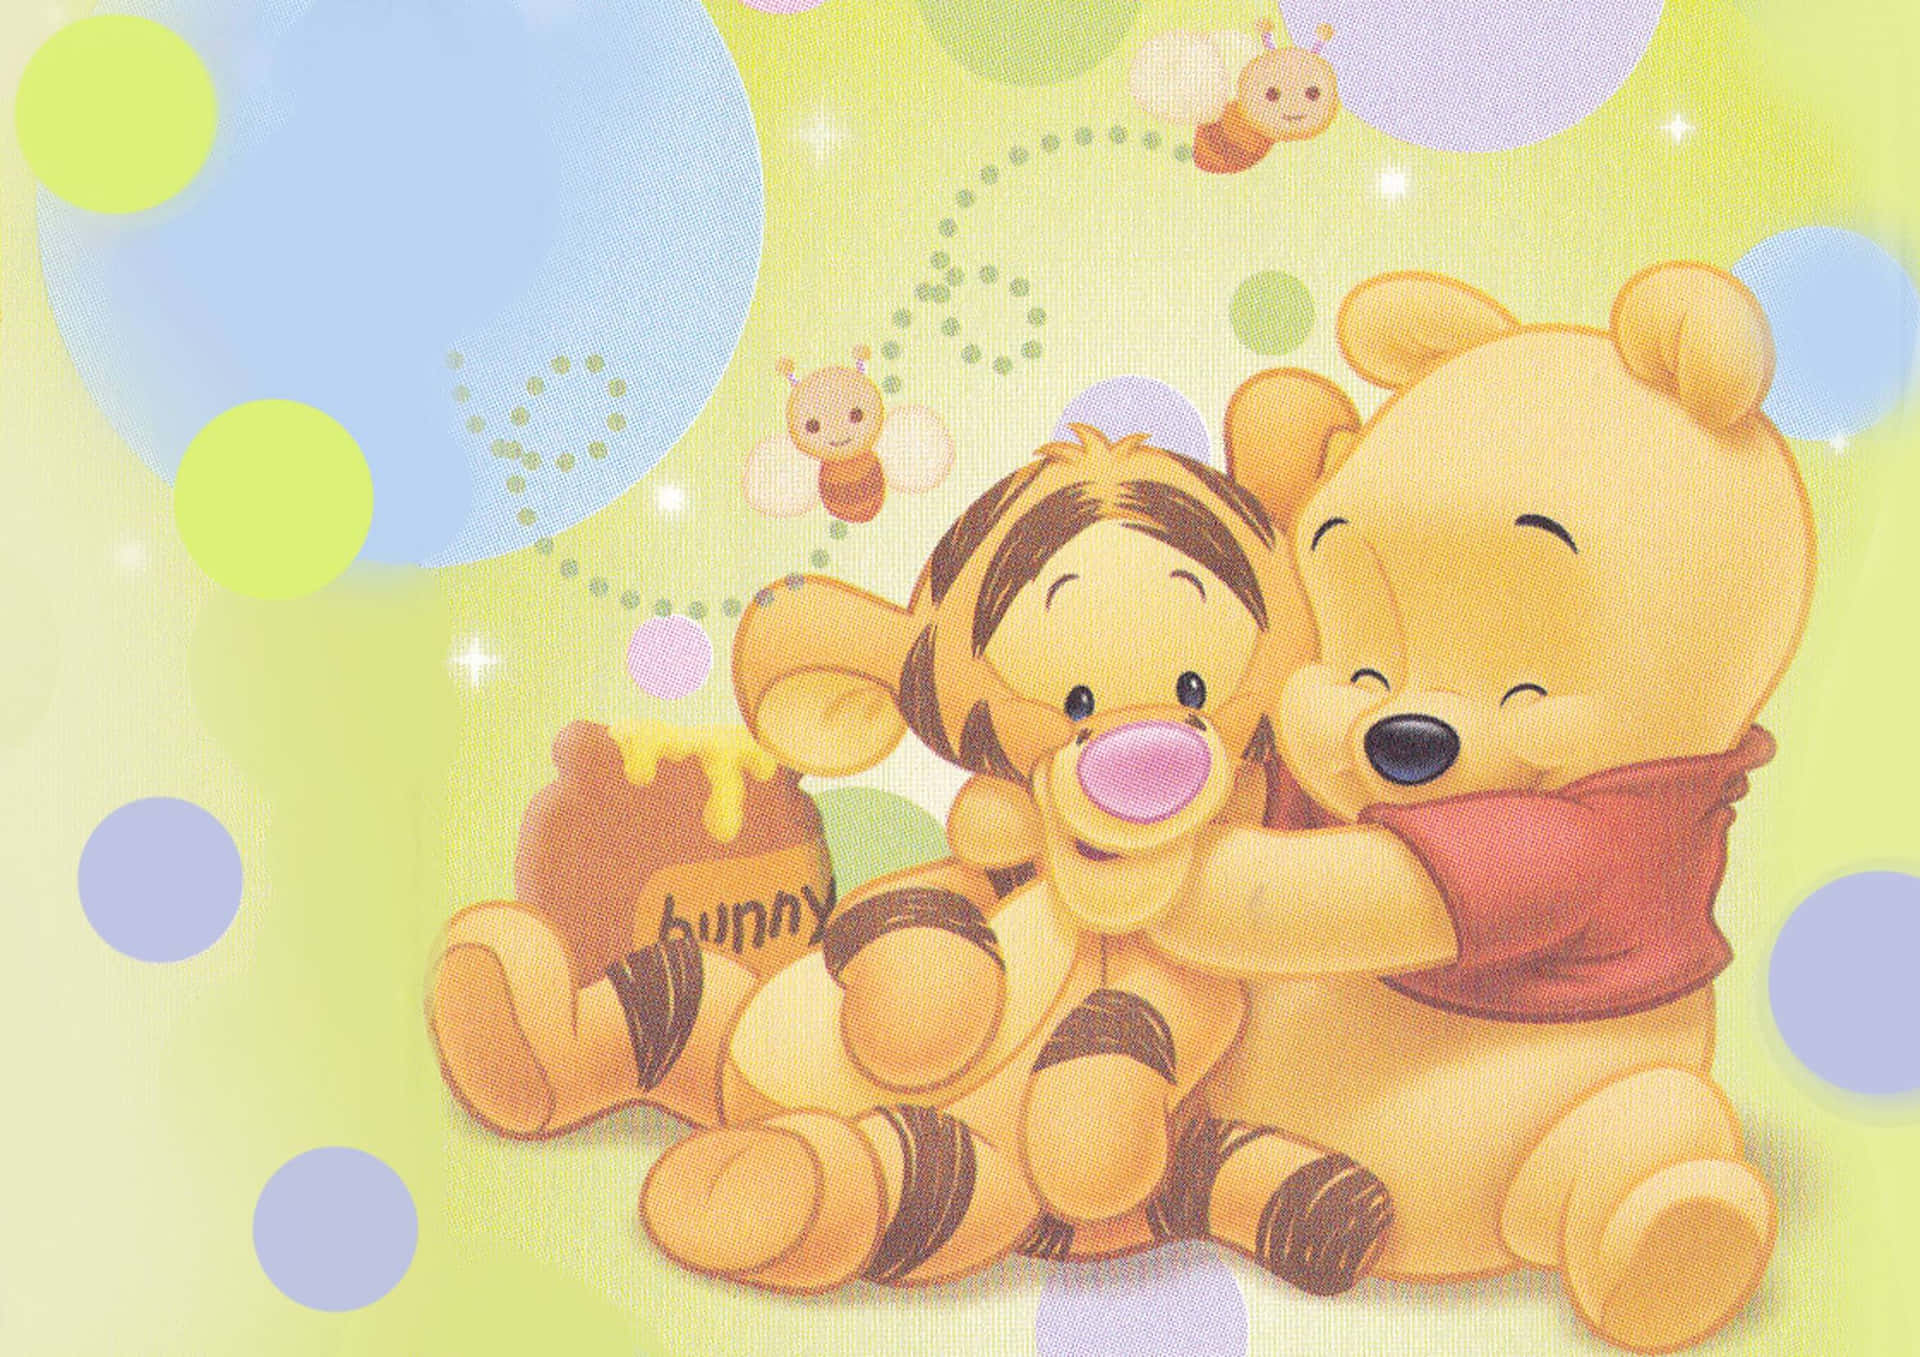 Winnie The Pooh enjoying the peaceful moments of life Wallpaper